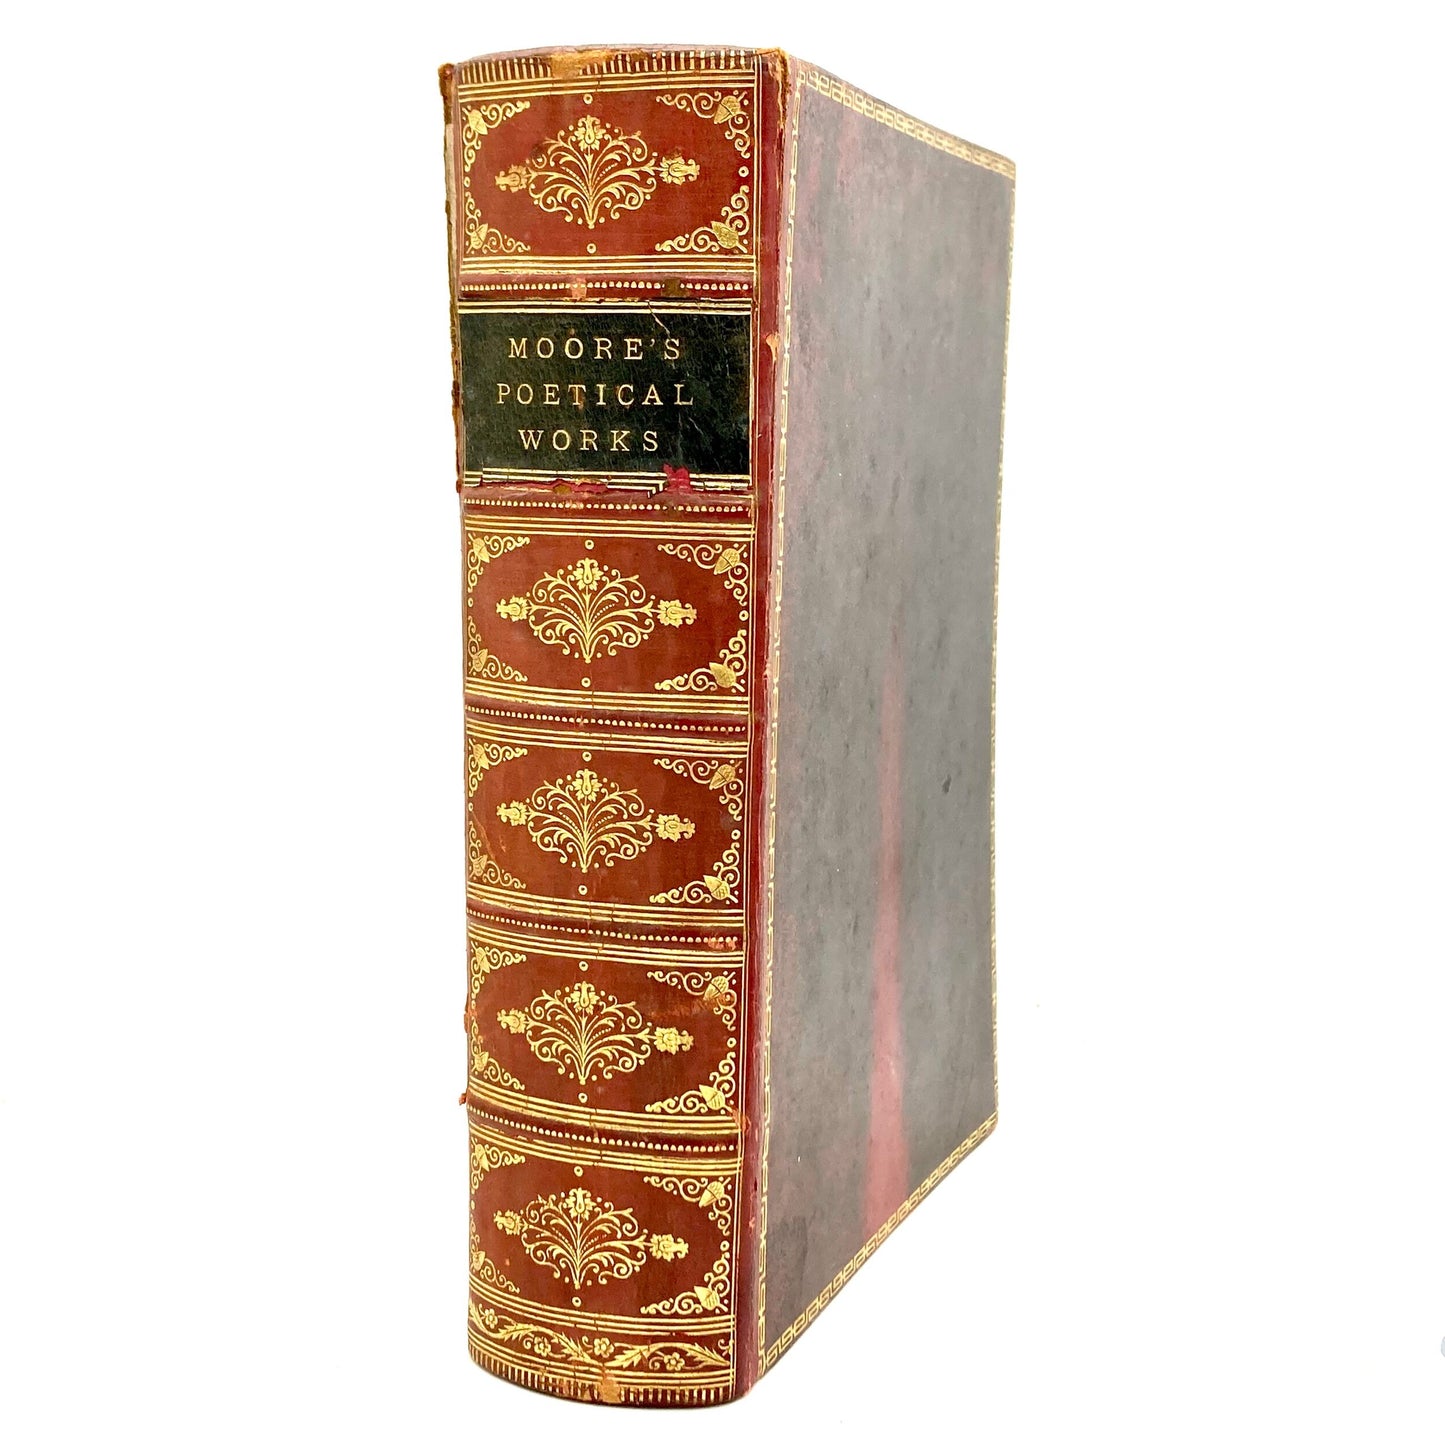 MOORE, Thomas “The Poetical Works of Thomas Moore” [Frederick Warne & Co, c1884] - Buzz Bookstore